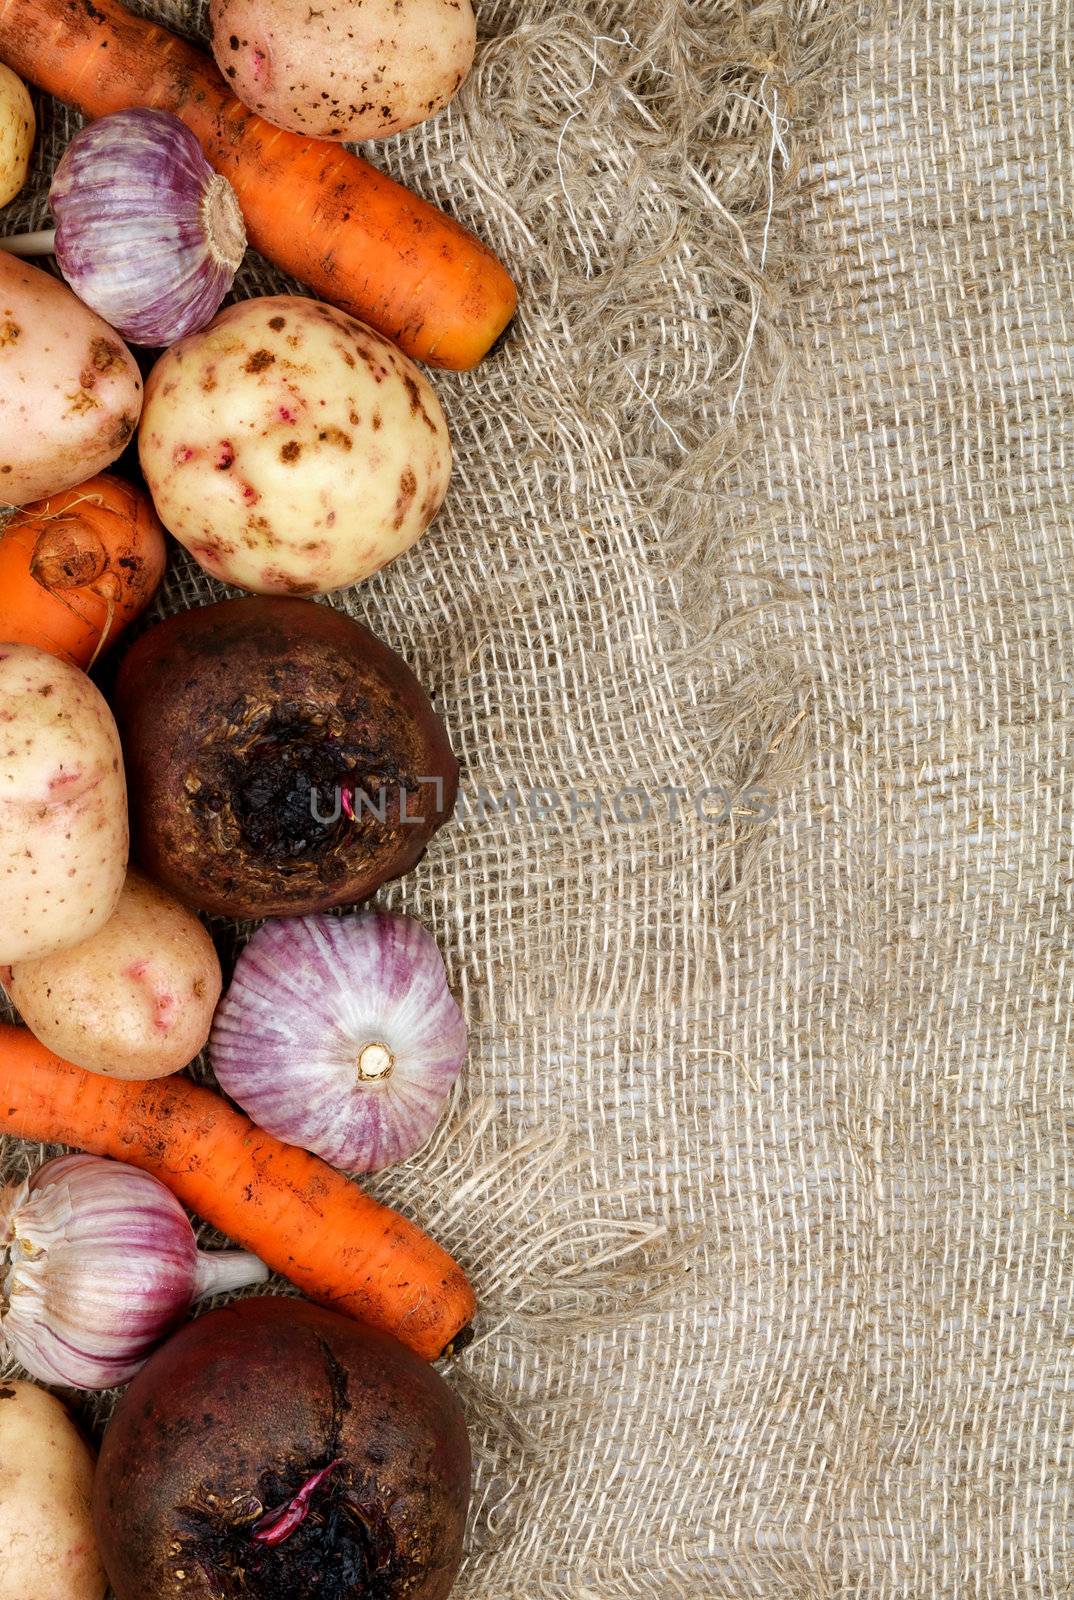 Frame of Raw Vegetables with Potato, Garlic, Carrot and Beet closeup on Sacking background